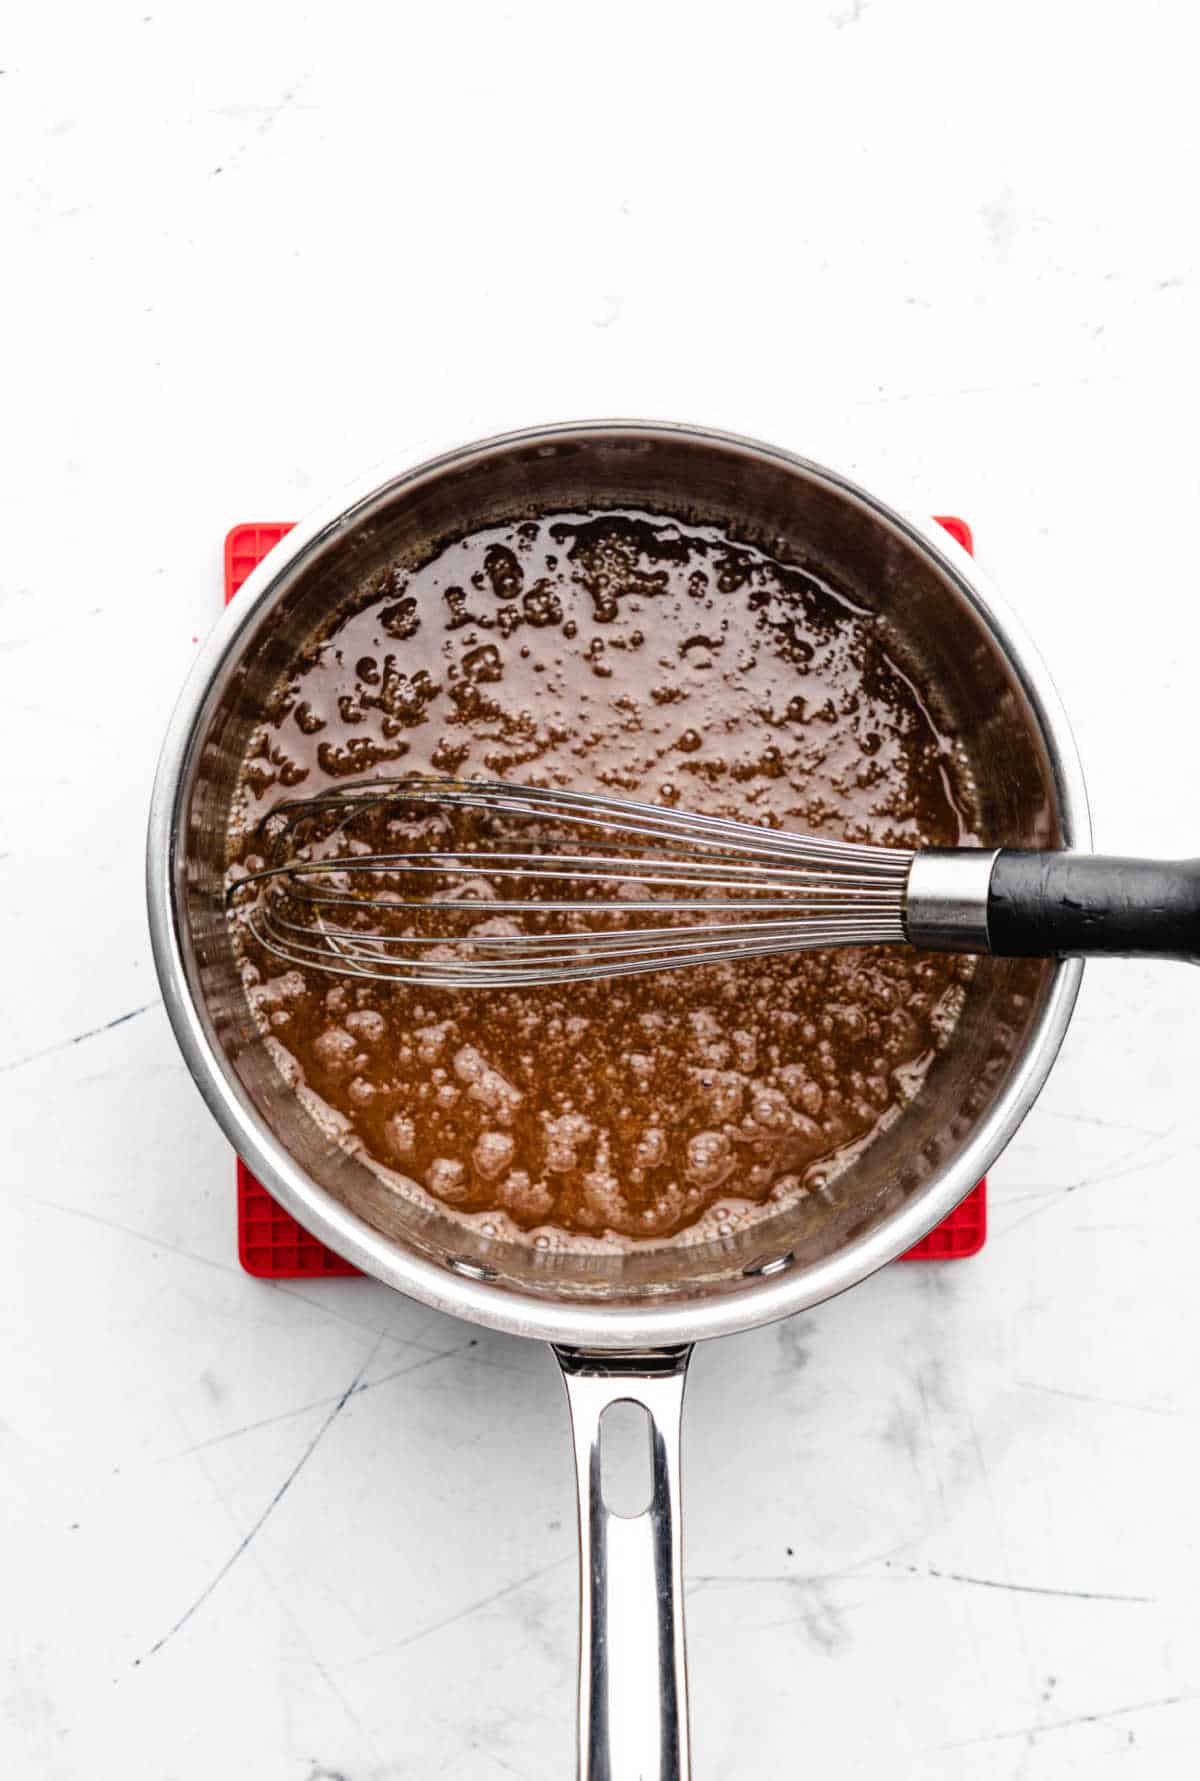 Butter and brown sugar mixture boiling in a saucepan.